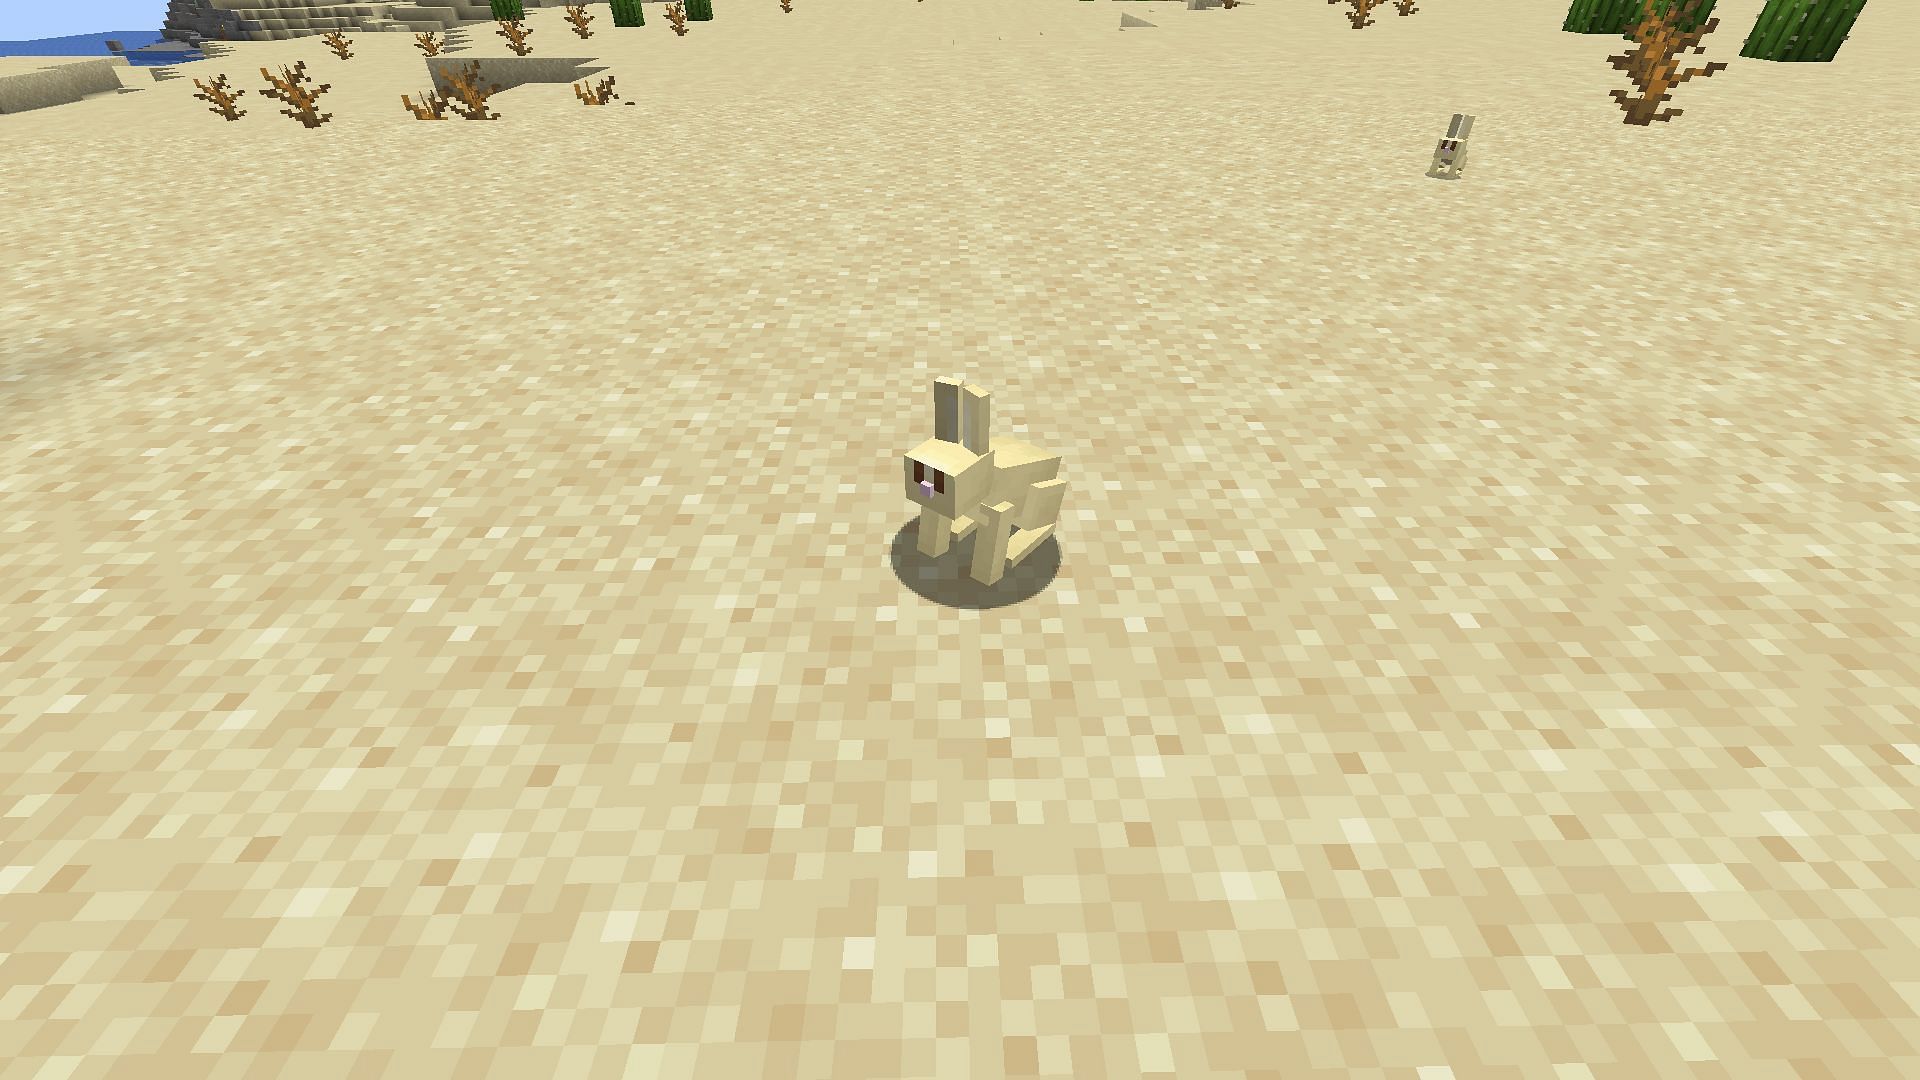 Rabbit can become a shiny pet in Minecraft (Image via Mojang)